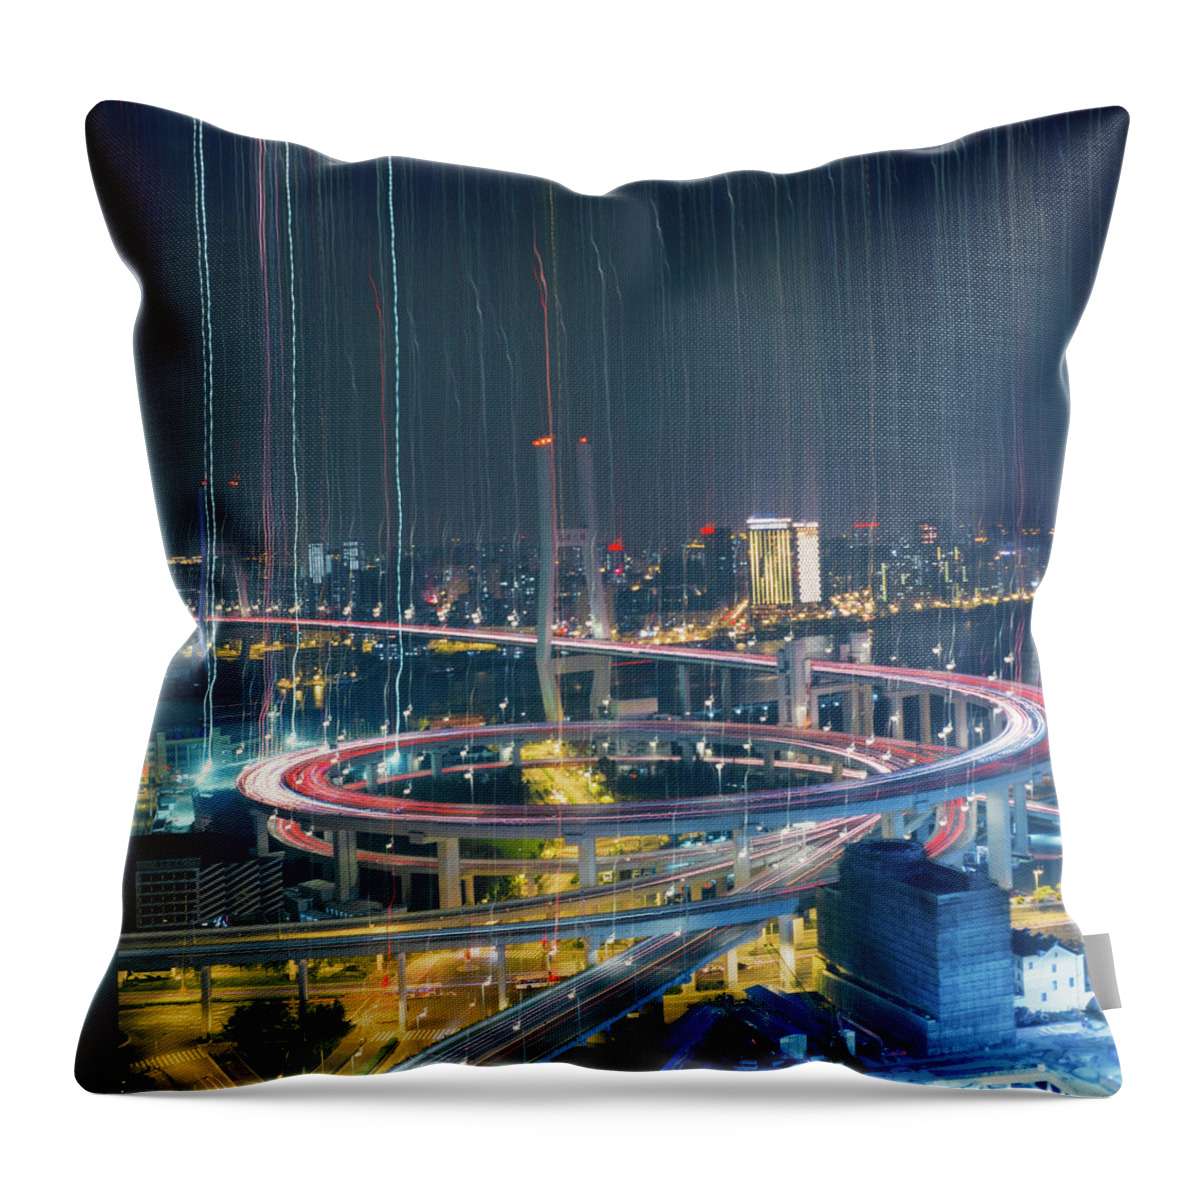 Built Structure Throw Pillow featuring the photograph Raining In City by Min Wei Photography